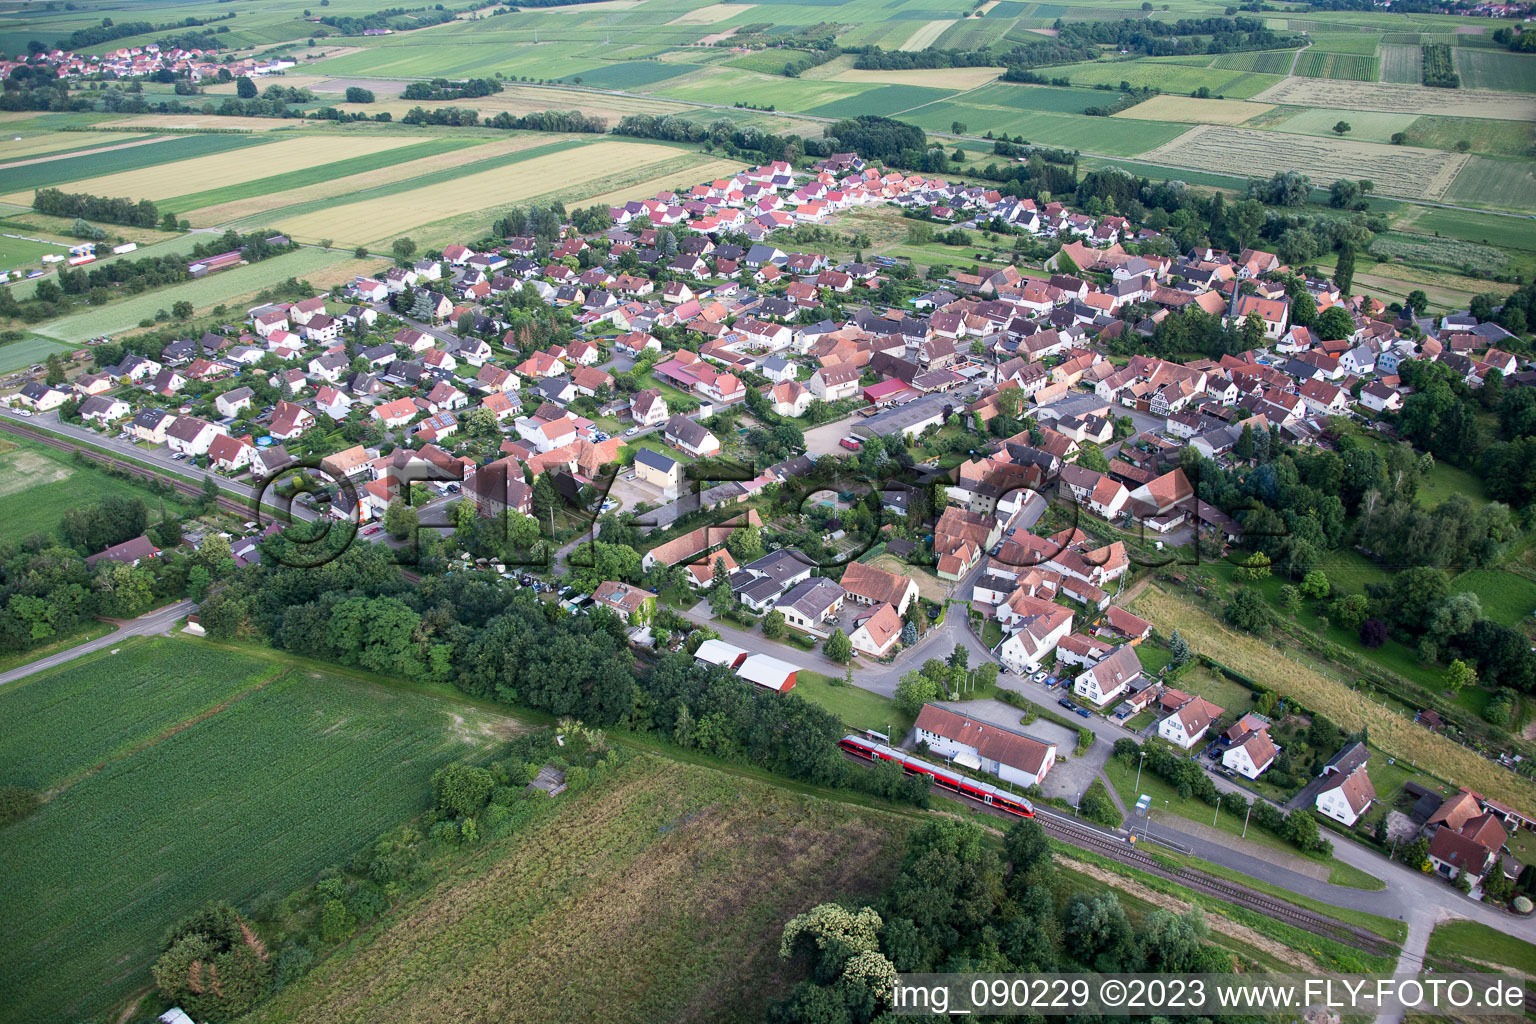 Aerial view of Barbelroth in the state Rhineland-Palatinate, Germany